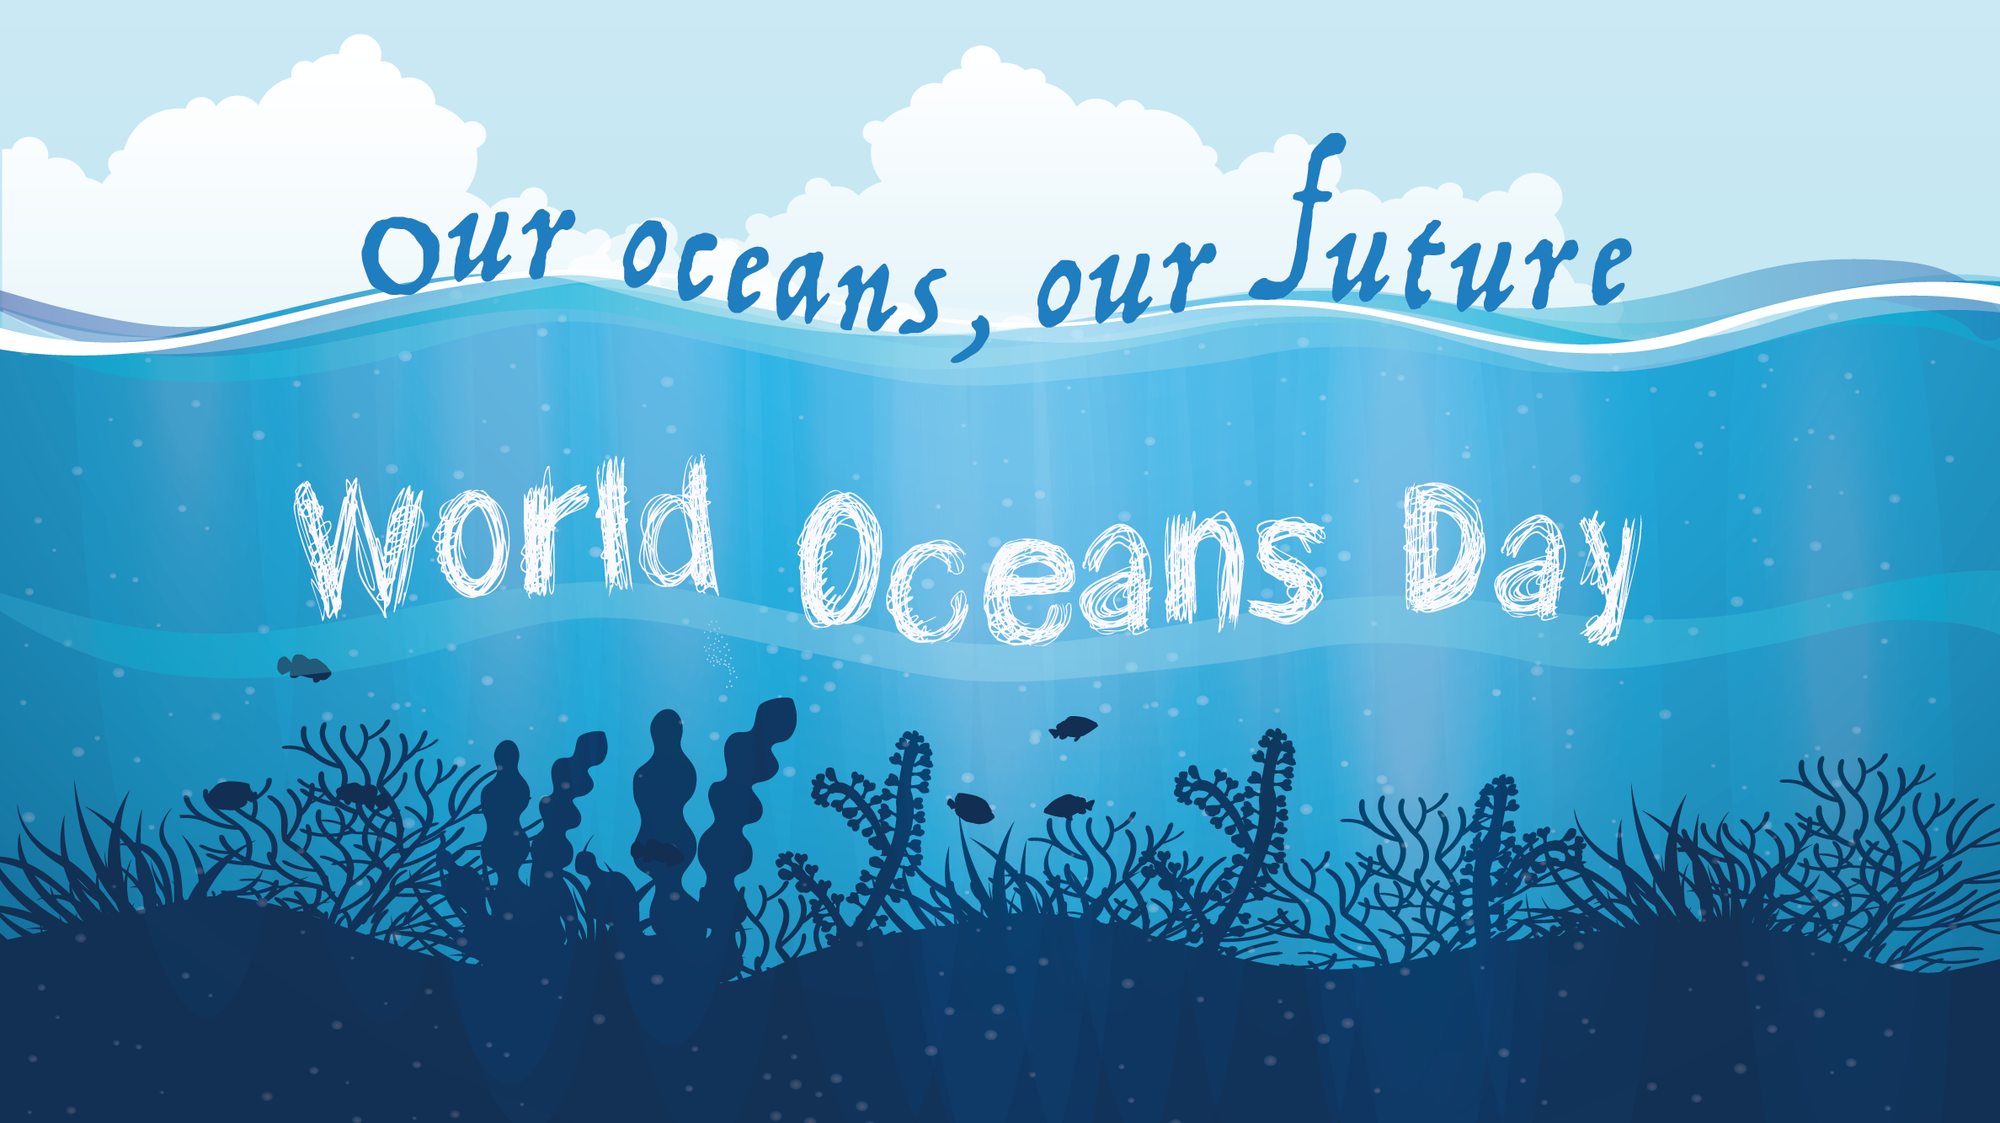 Don't let a cast get you down on World Oceans Day